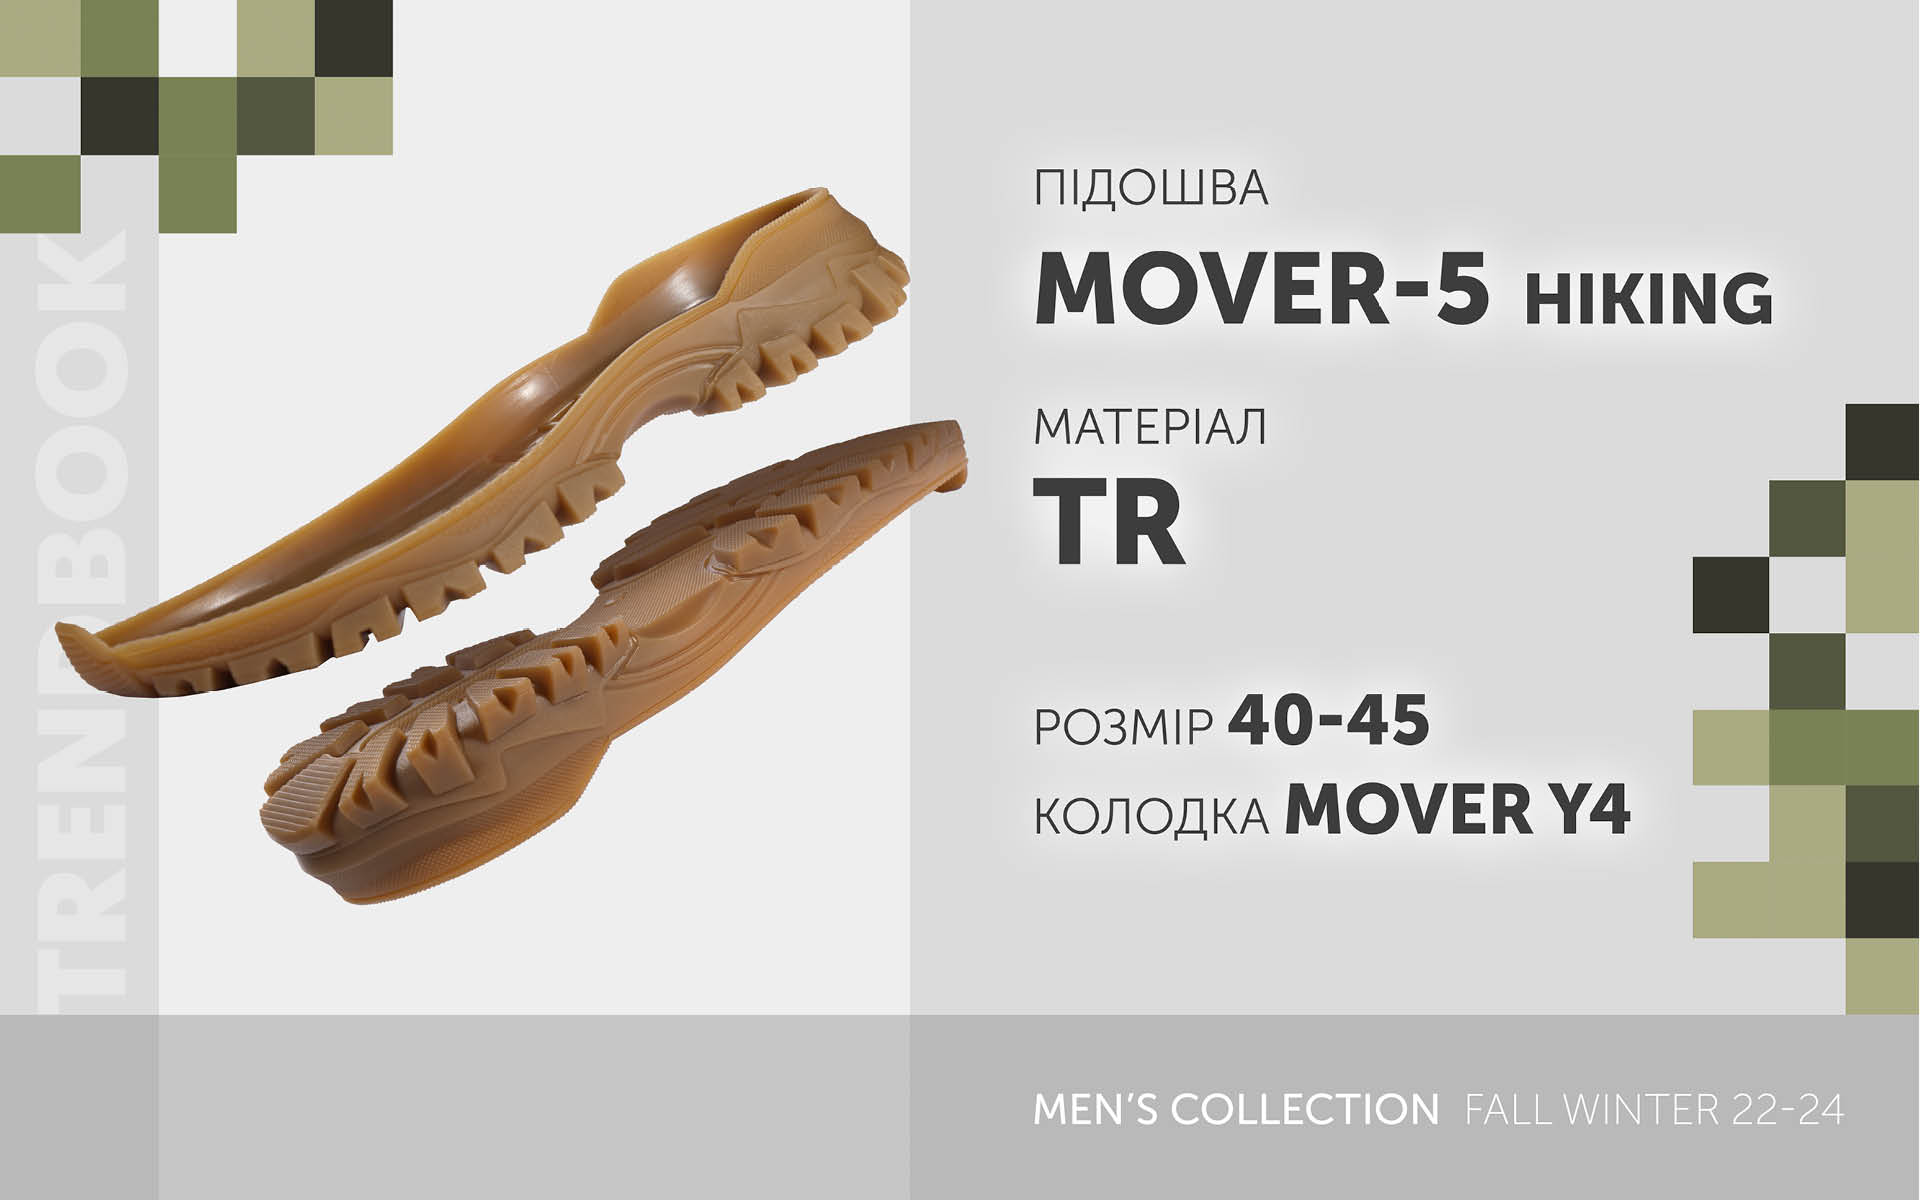 Mover-5